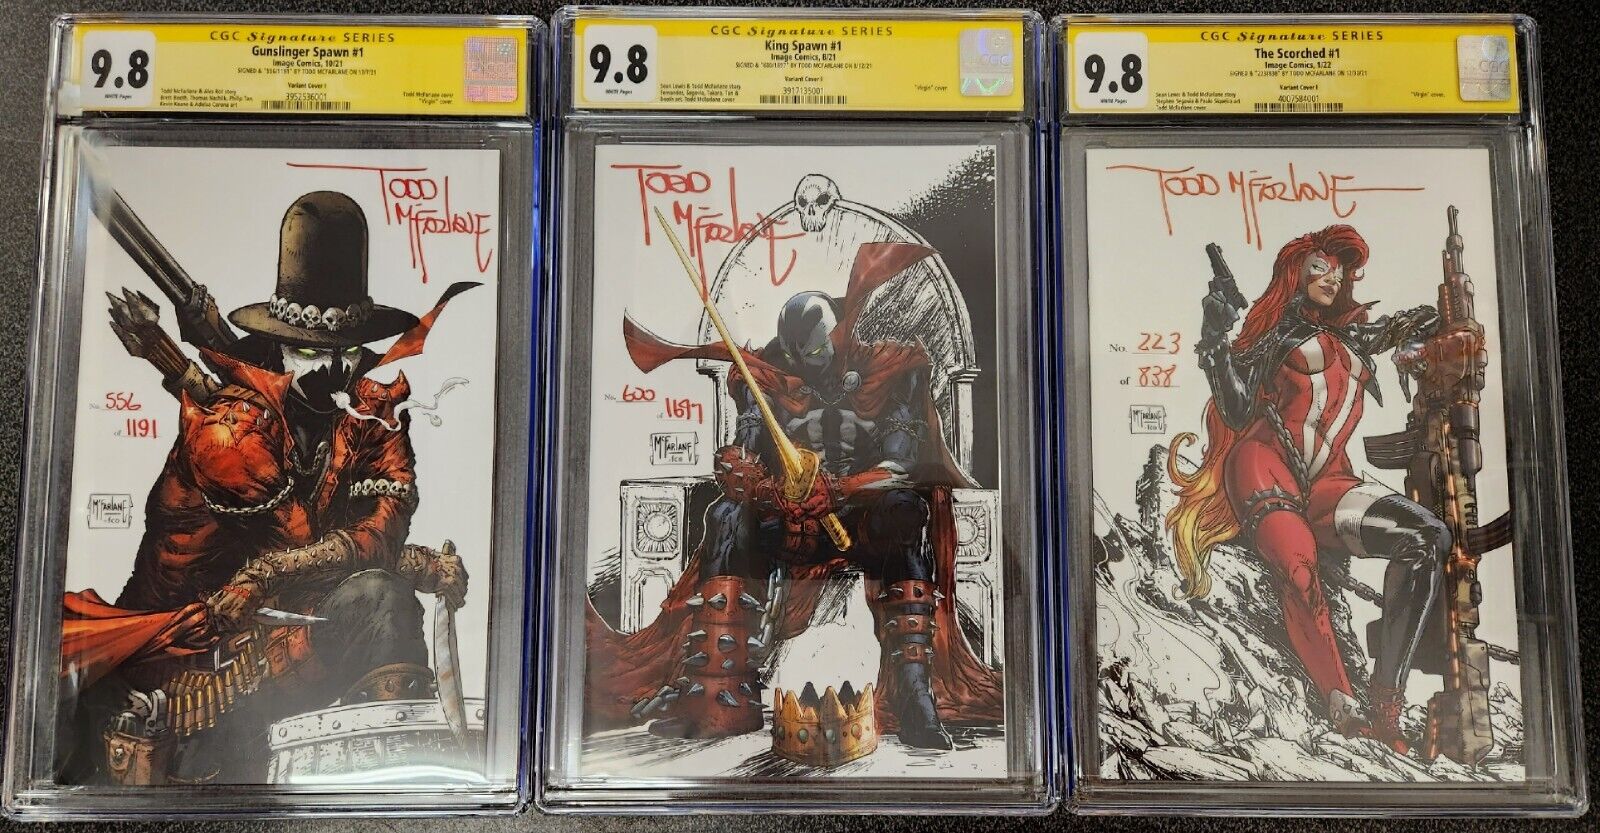 KING SPAWN GUNSLINGER SCORCHED #1 ALL THREE CGC 9.8 SIGNED BY TODD MCFARLANE